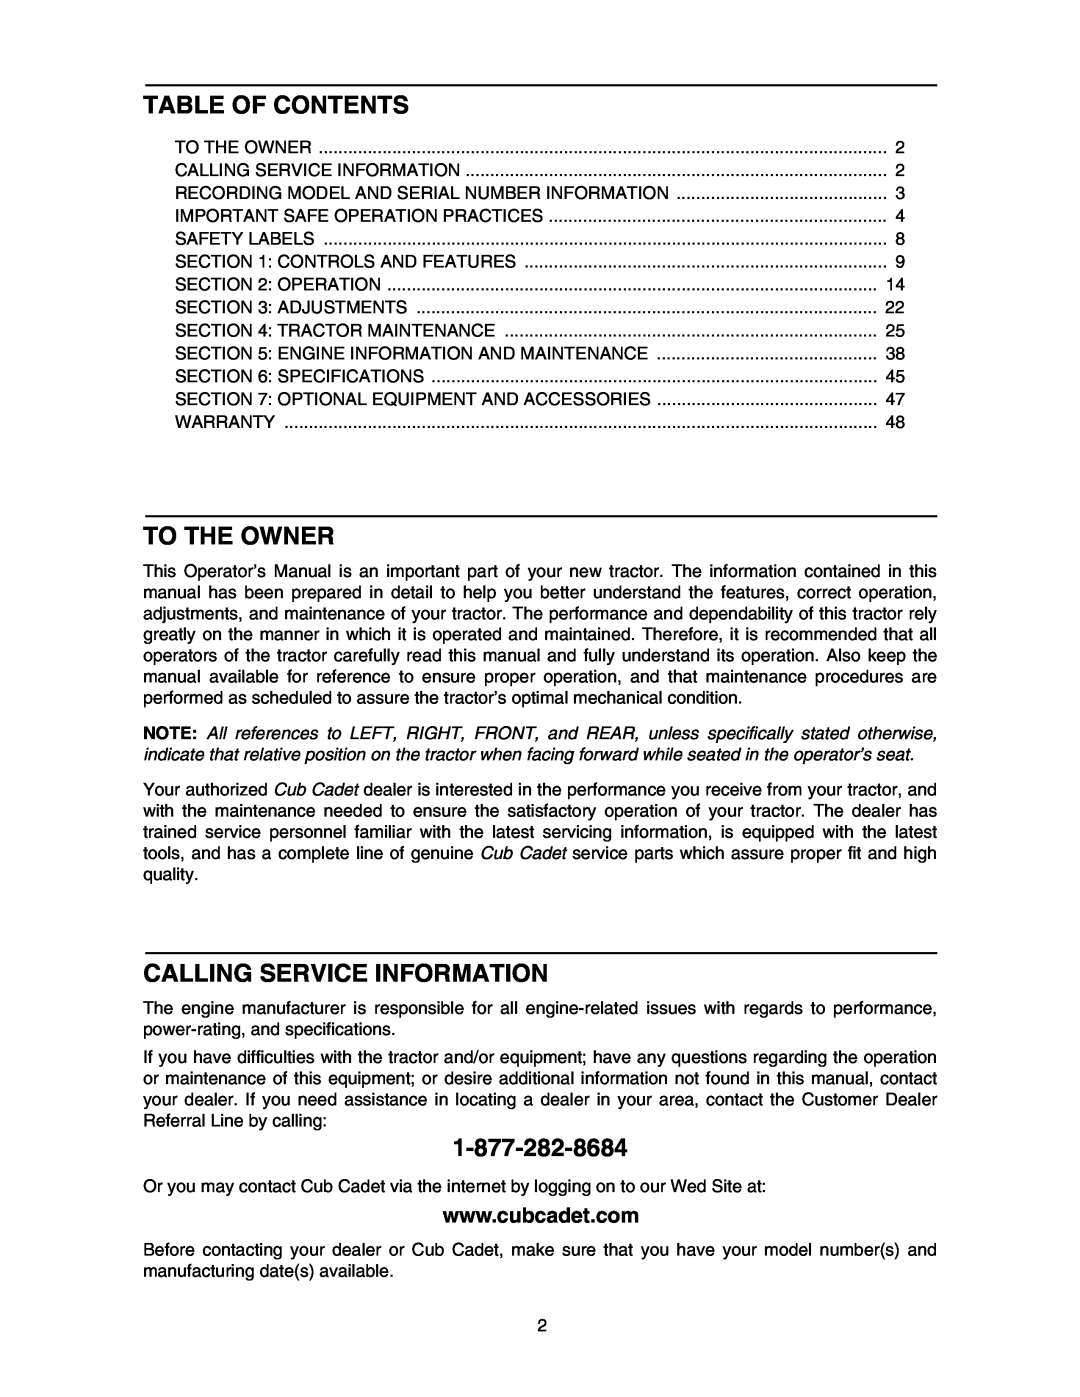 Cub Cadet 5254 manual Table Of Contents, To The Owner, Calling Service Information 